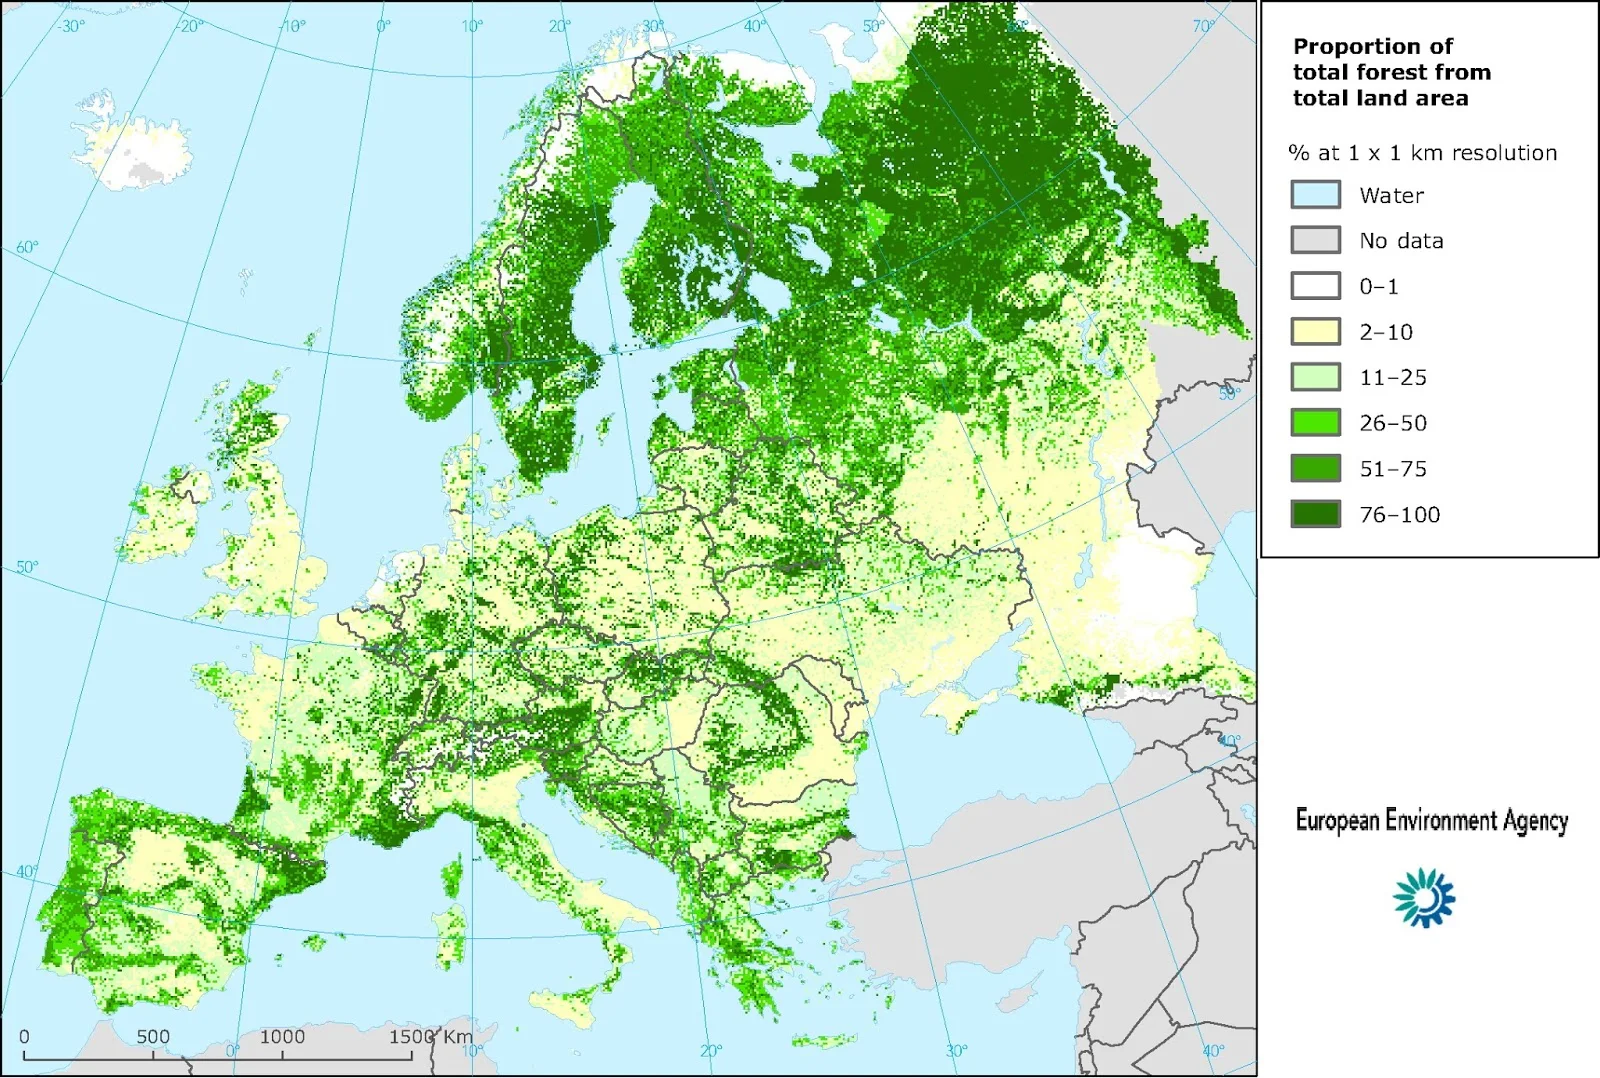 Forest cover map by European Environment Agency